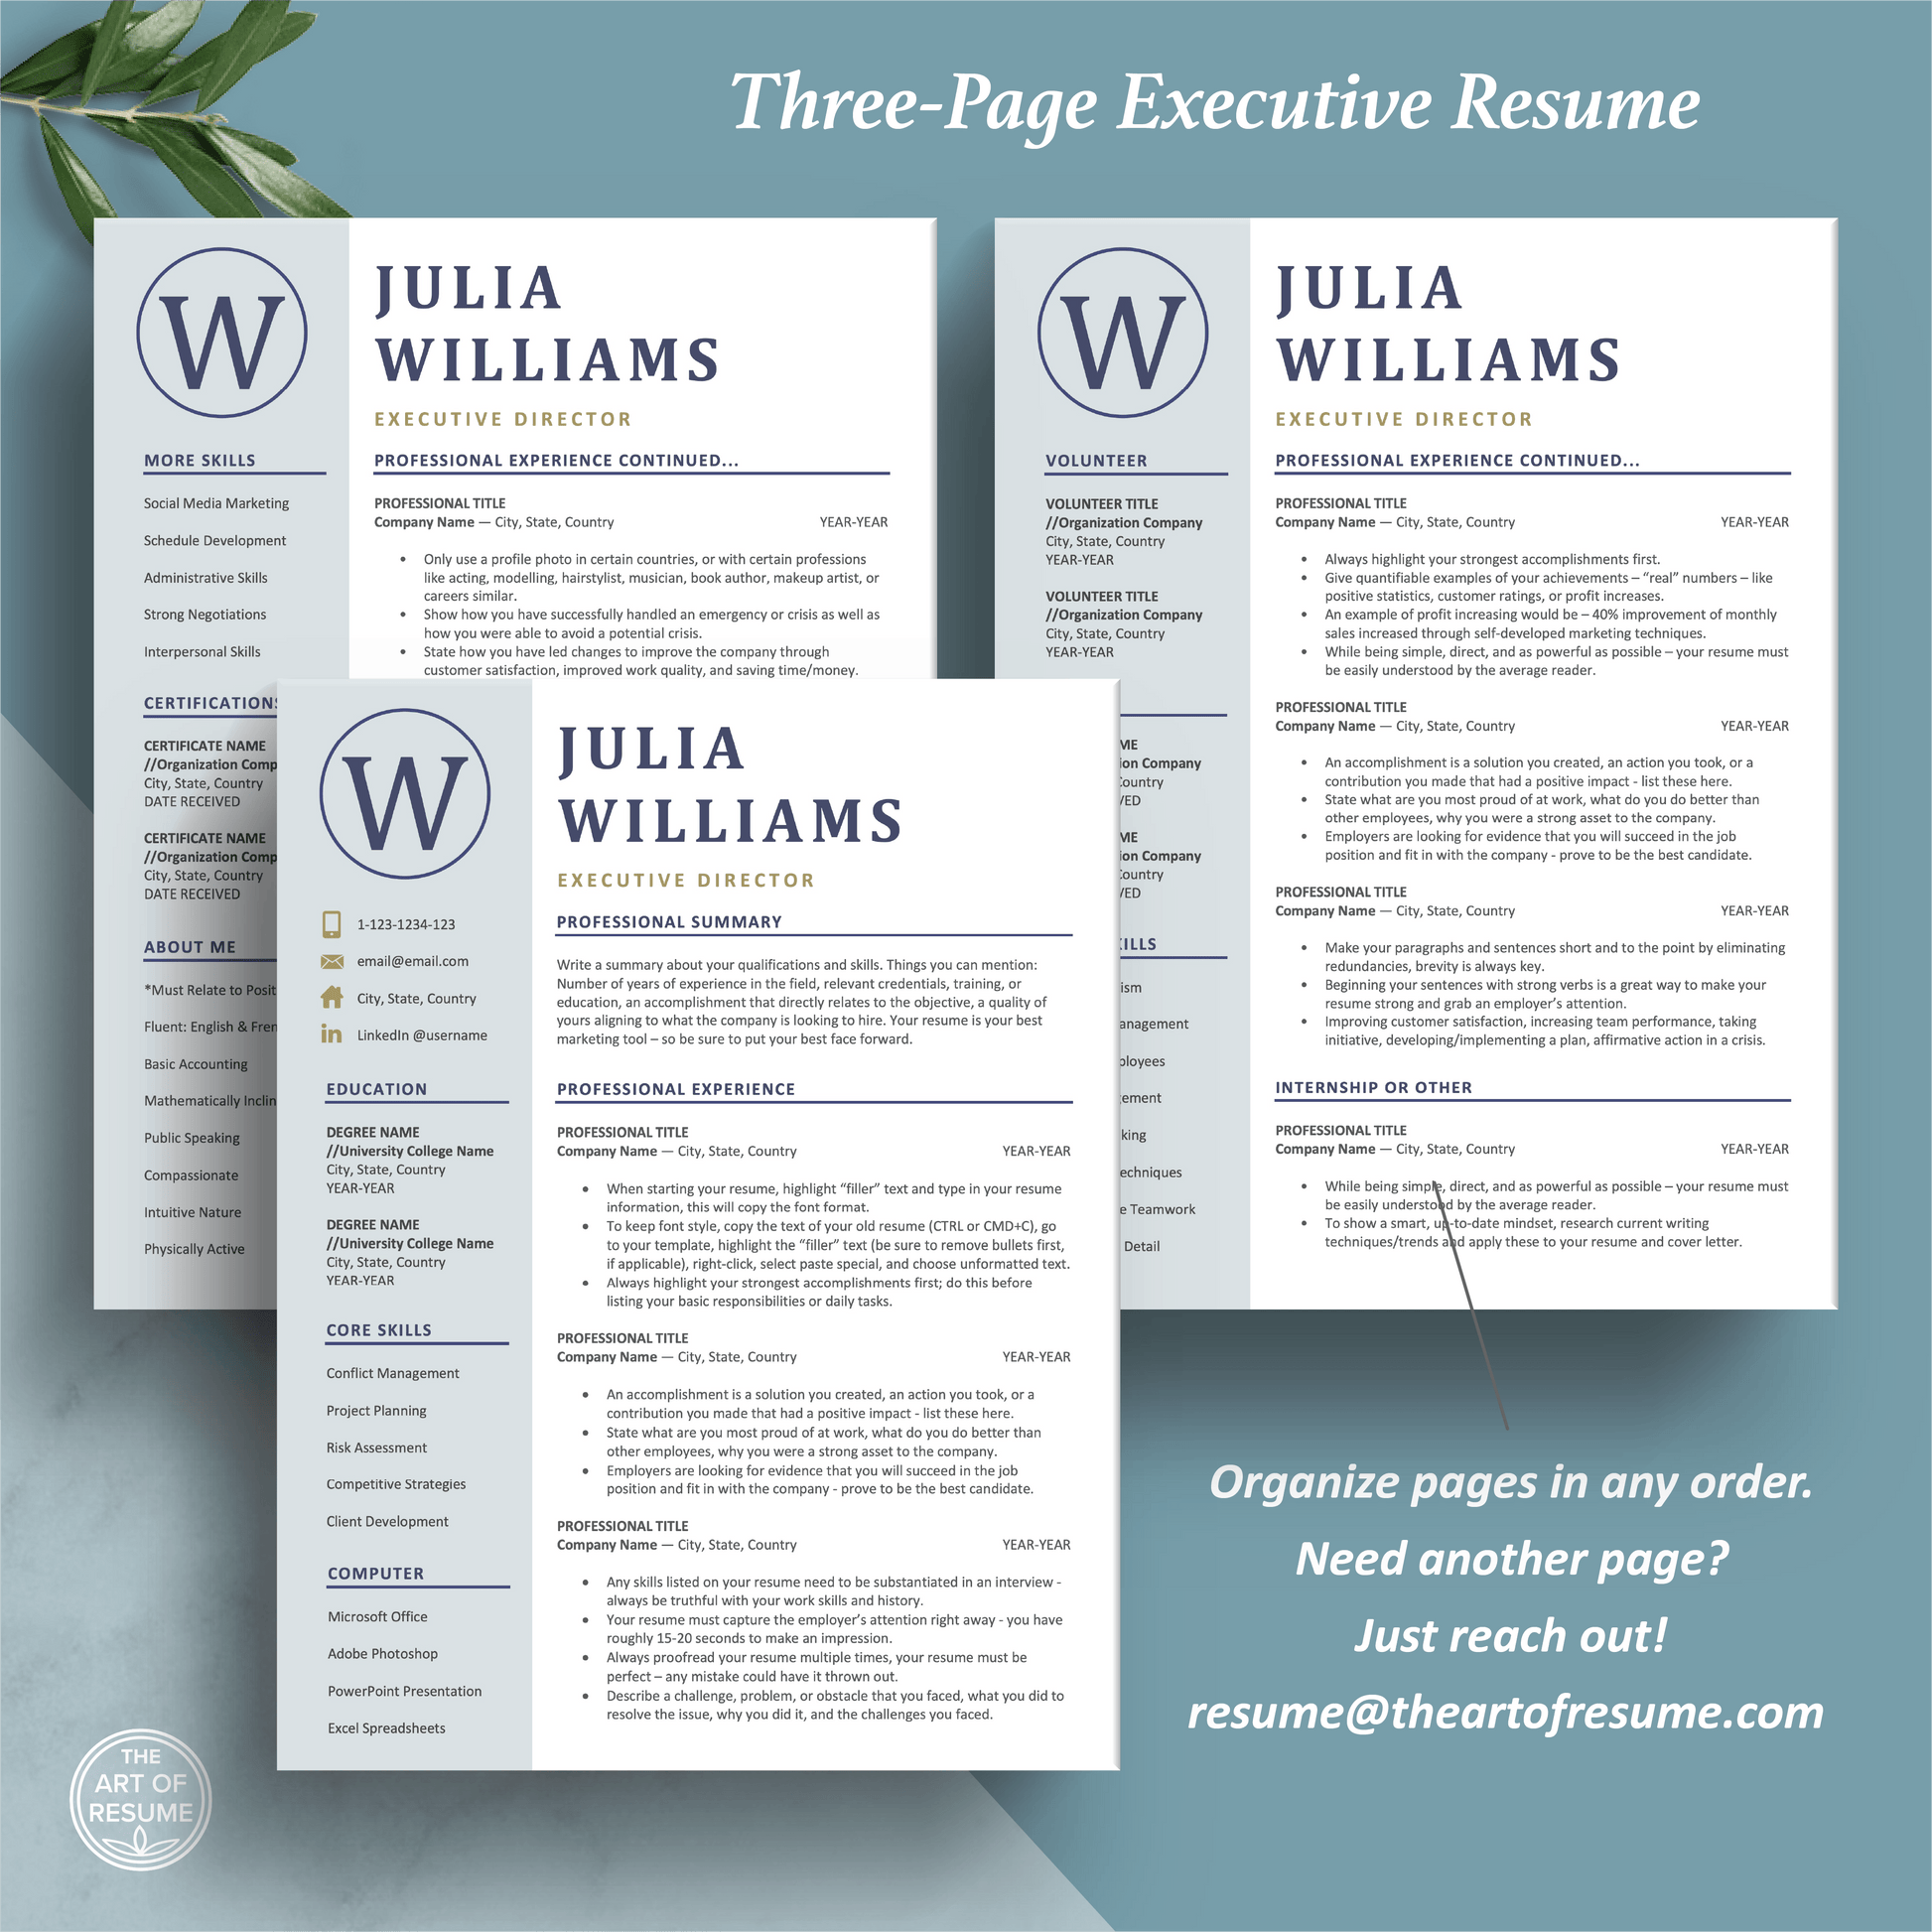 The Art of Resume Templates | Three-Page Professional Blue Executive C-Suite Level  Resume CV Template Format | Curriculum Vitae